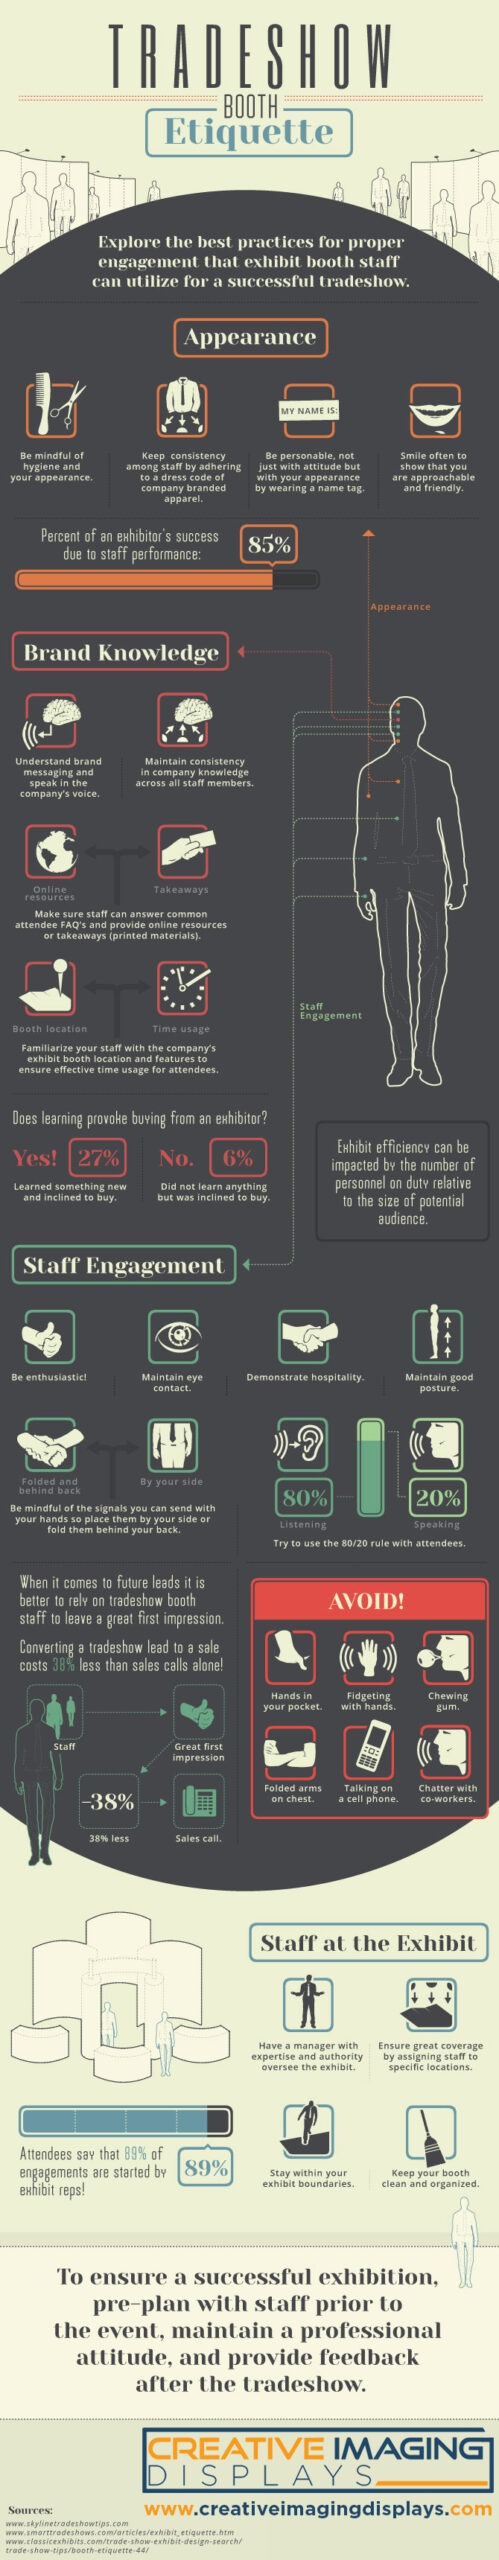 Trade Show Booth Etiquette Infographic Creative Imaging Displays